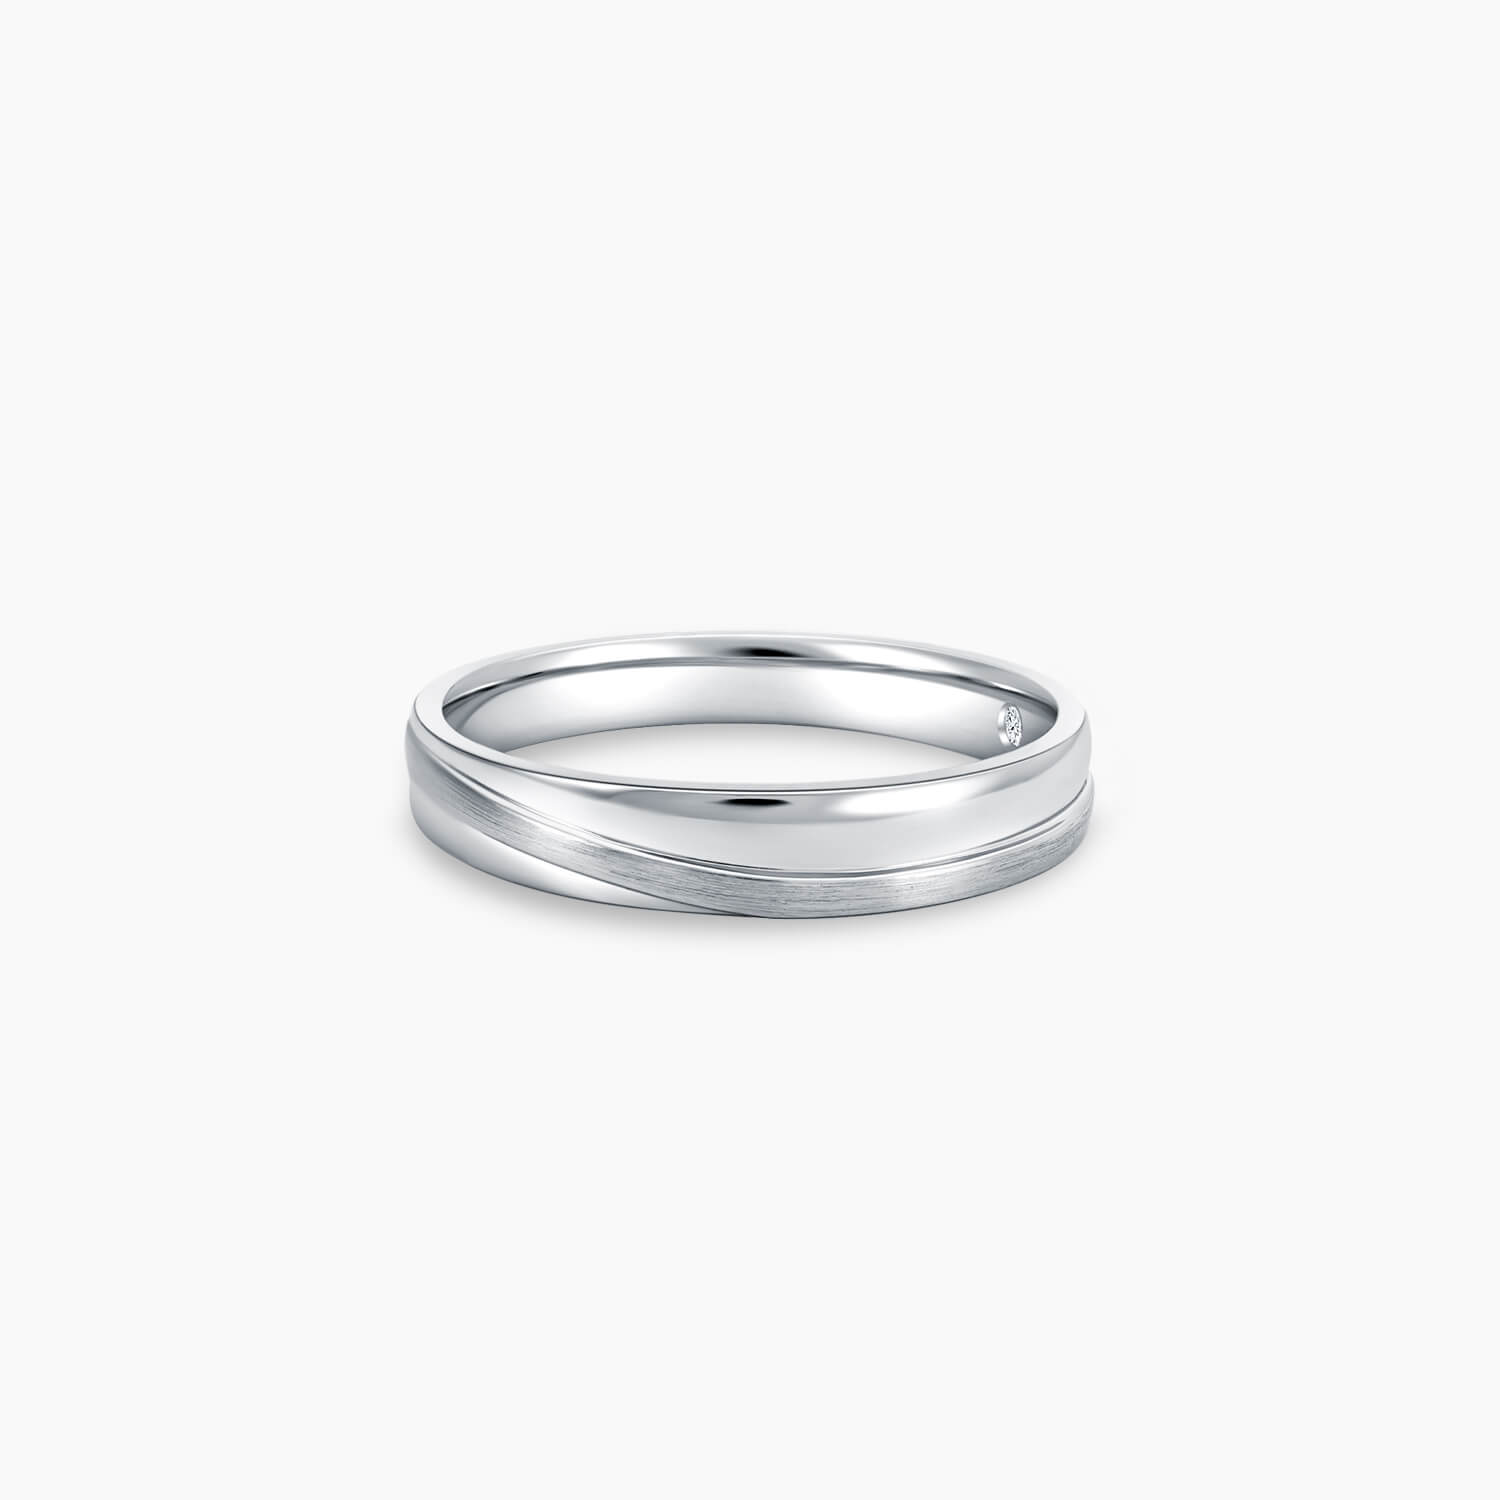 LVC PURETE CLASSIC WEDDING BAND IN PLATINUM WITH MATTE FINISH a wedding band for men in platinum